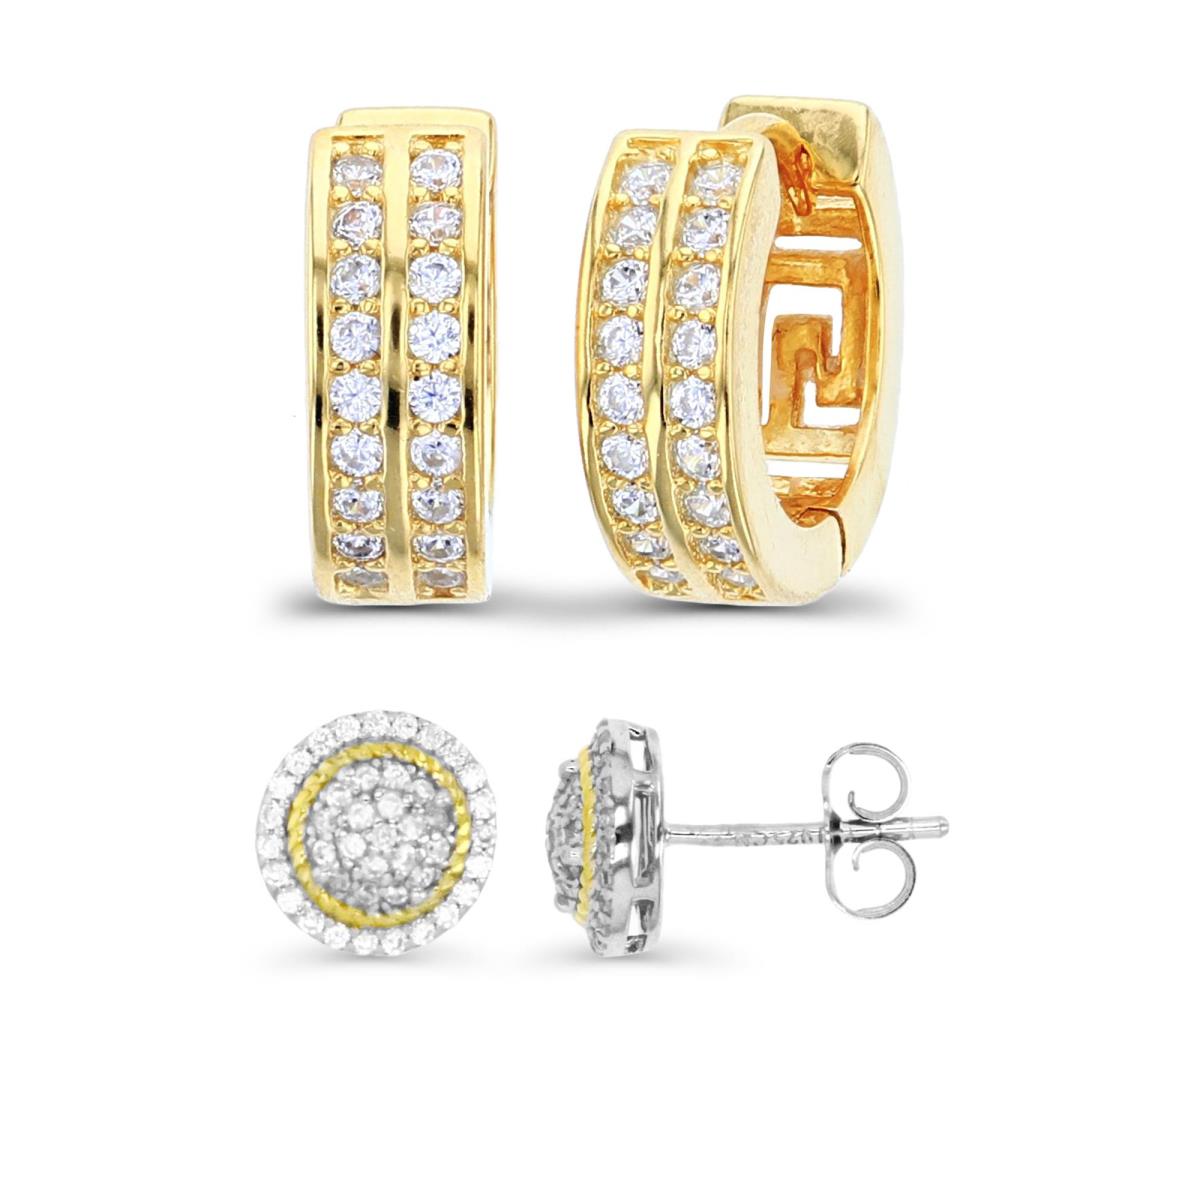 Sterling Silver Yellow & White 9MM White CZ Studs & 12.2X4.3MM Huggie Earring Set